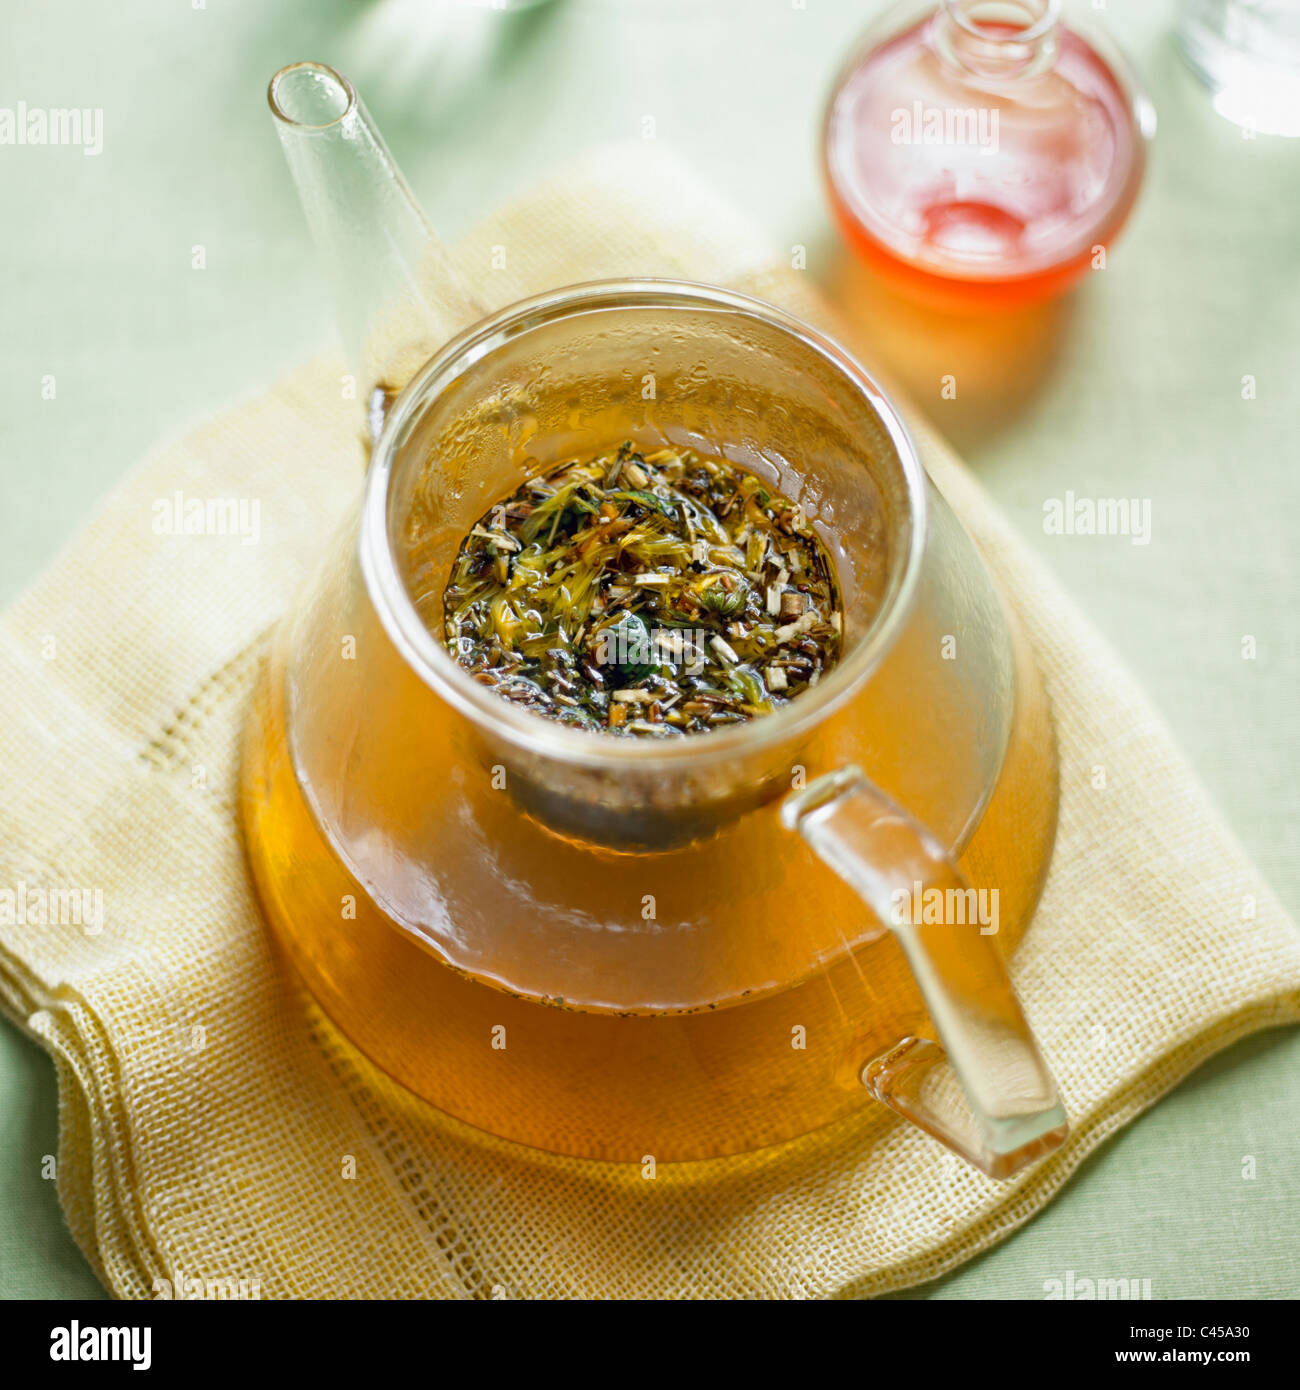 Marigold and peppermint herbal tea in tea pot, close-up Stock Photo